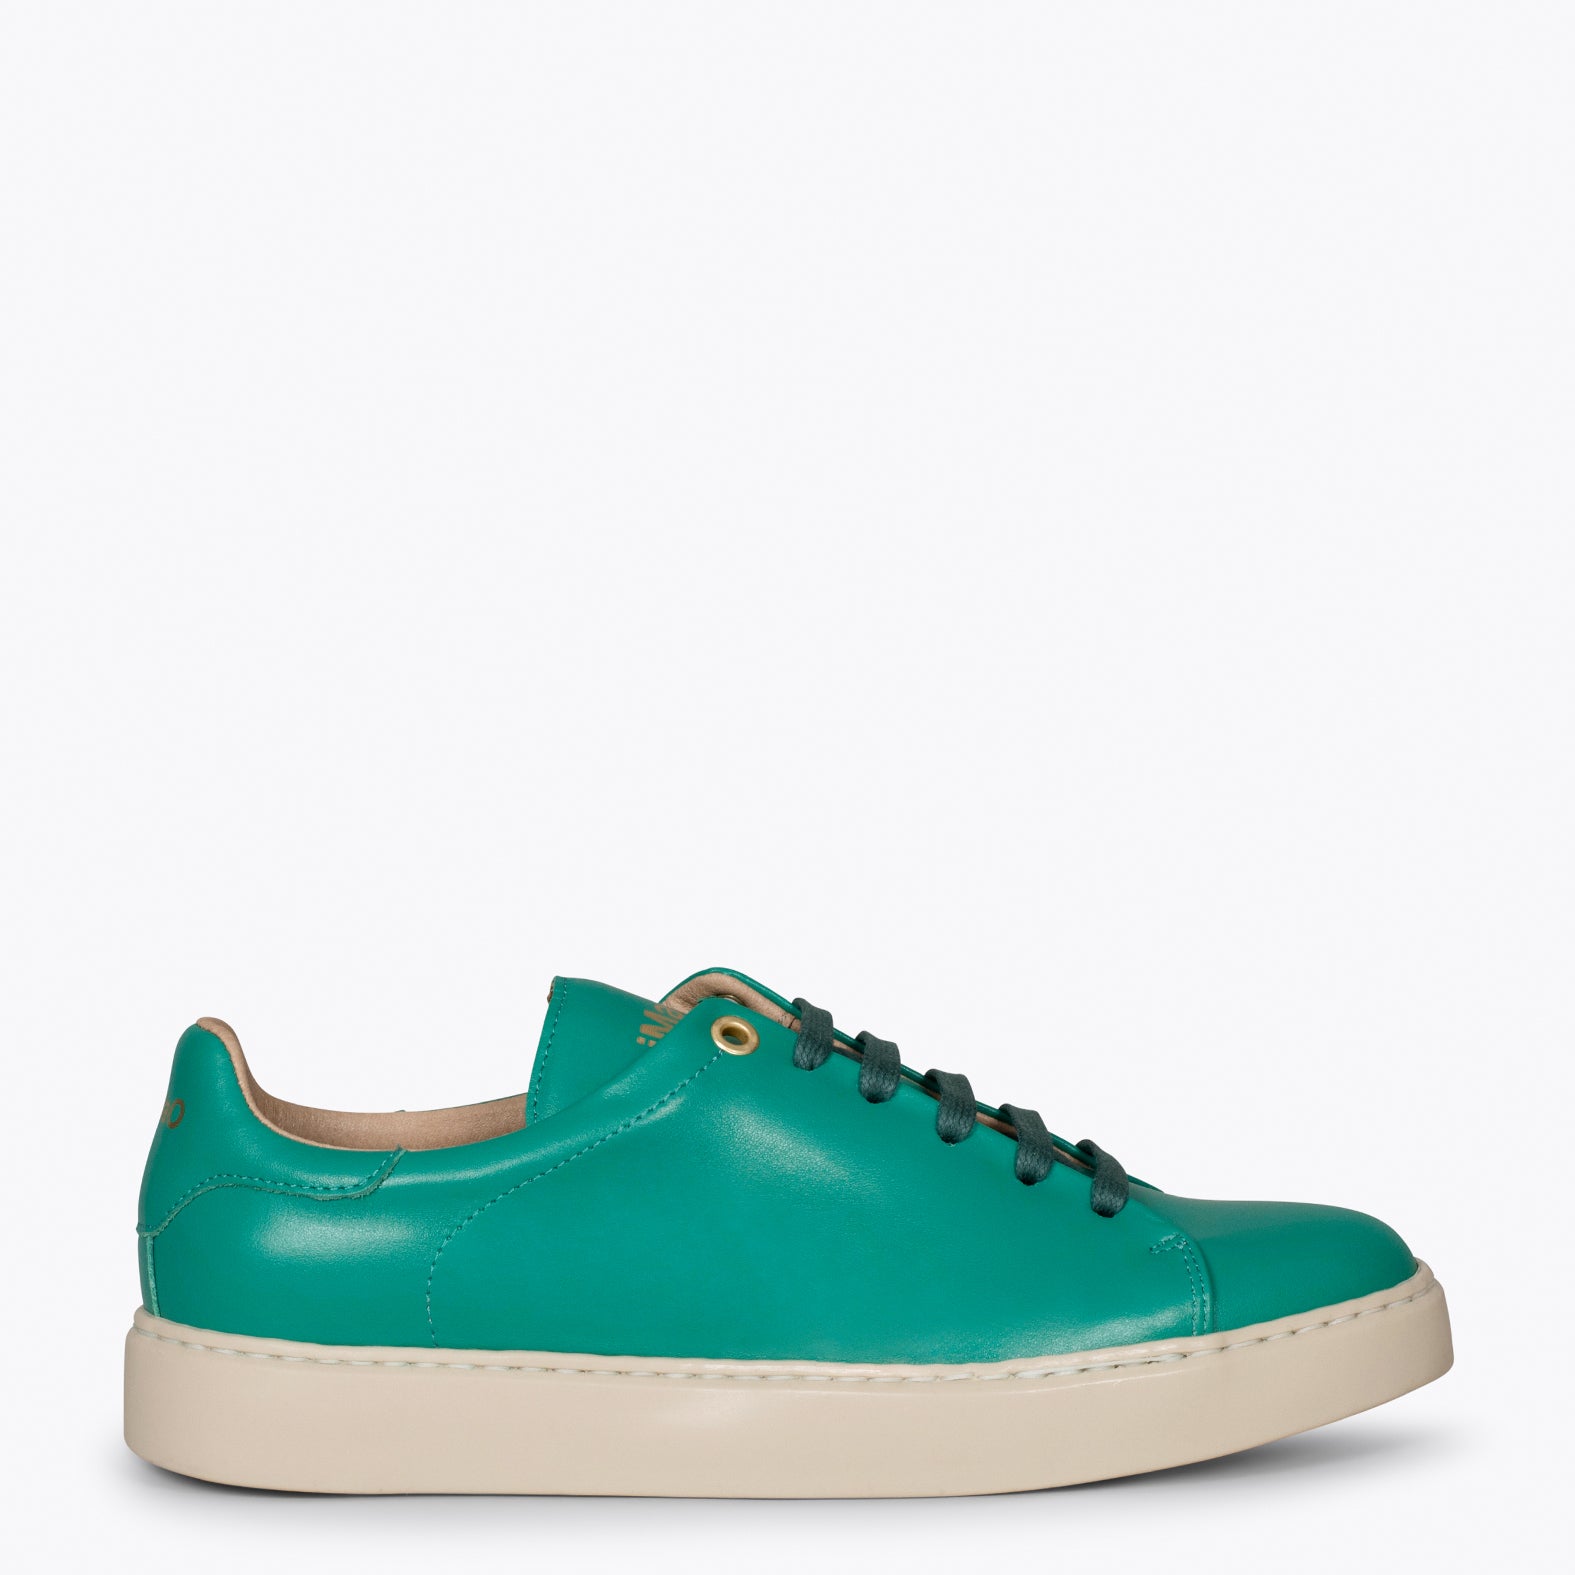 SKATE – GREEN casual leather sneaker